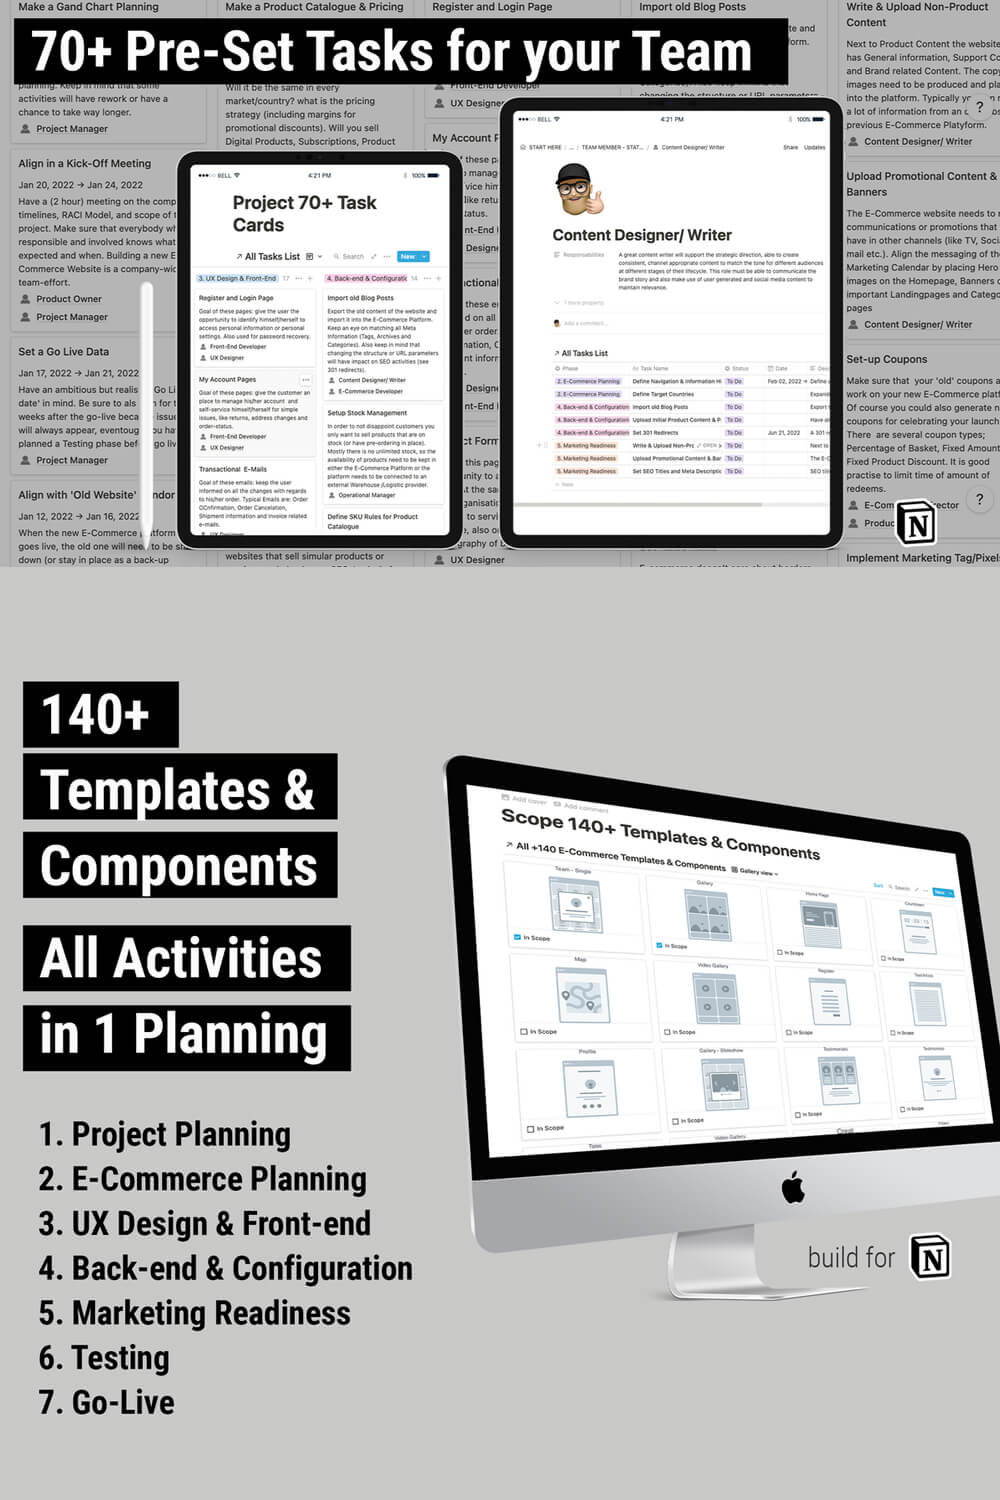 140+ templates and components: go-live, testing etc.